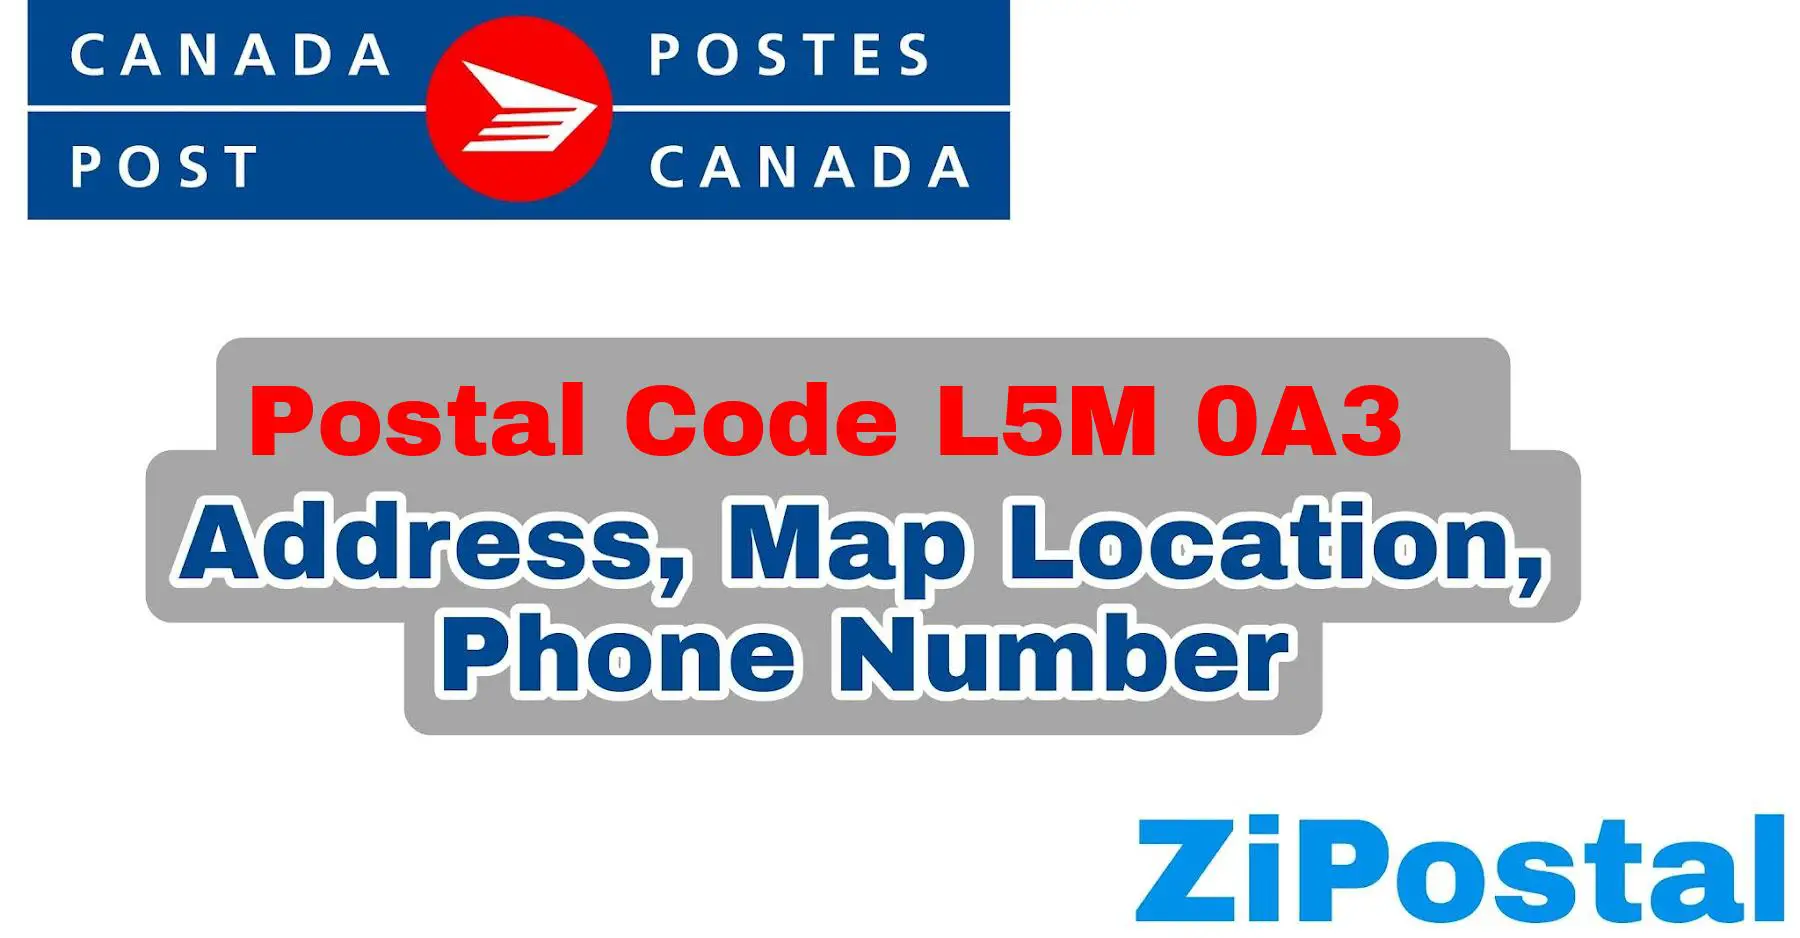 Postal Code L5M 0A3 Address Map Location and Phone Number